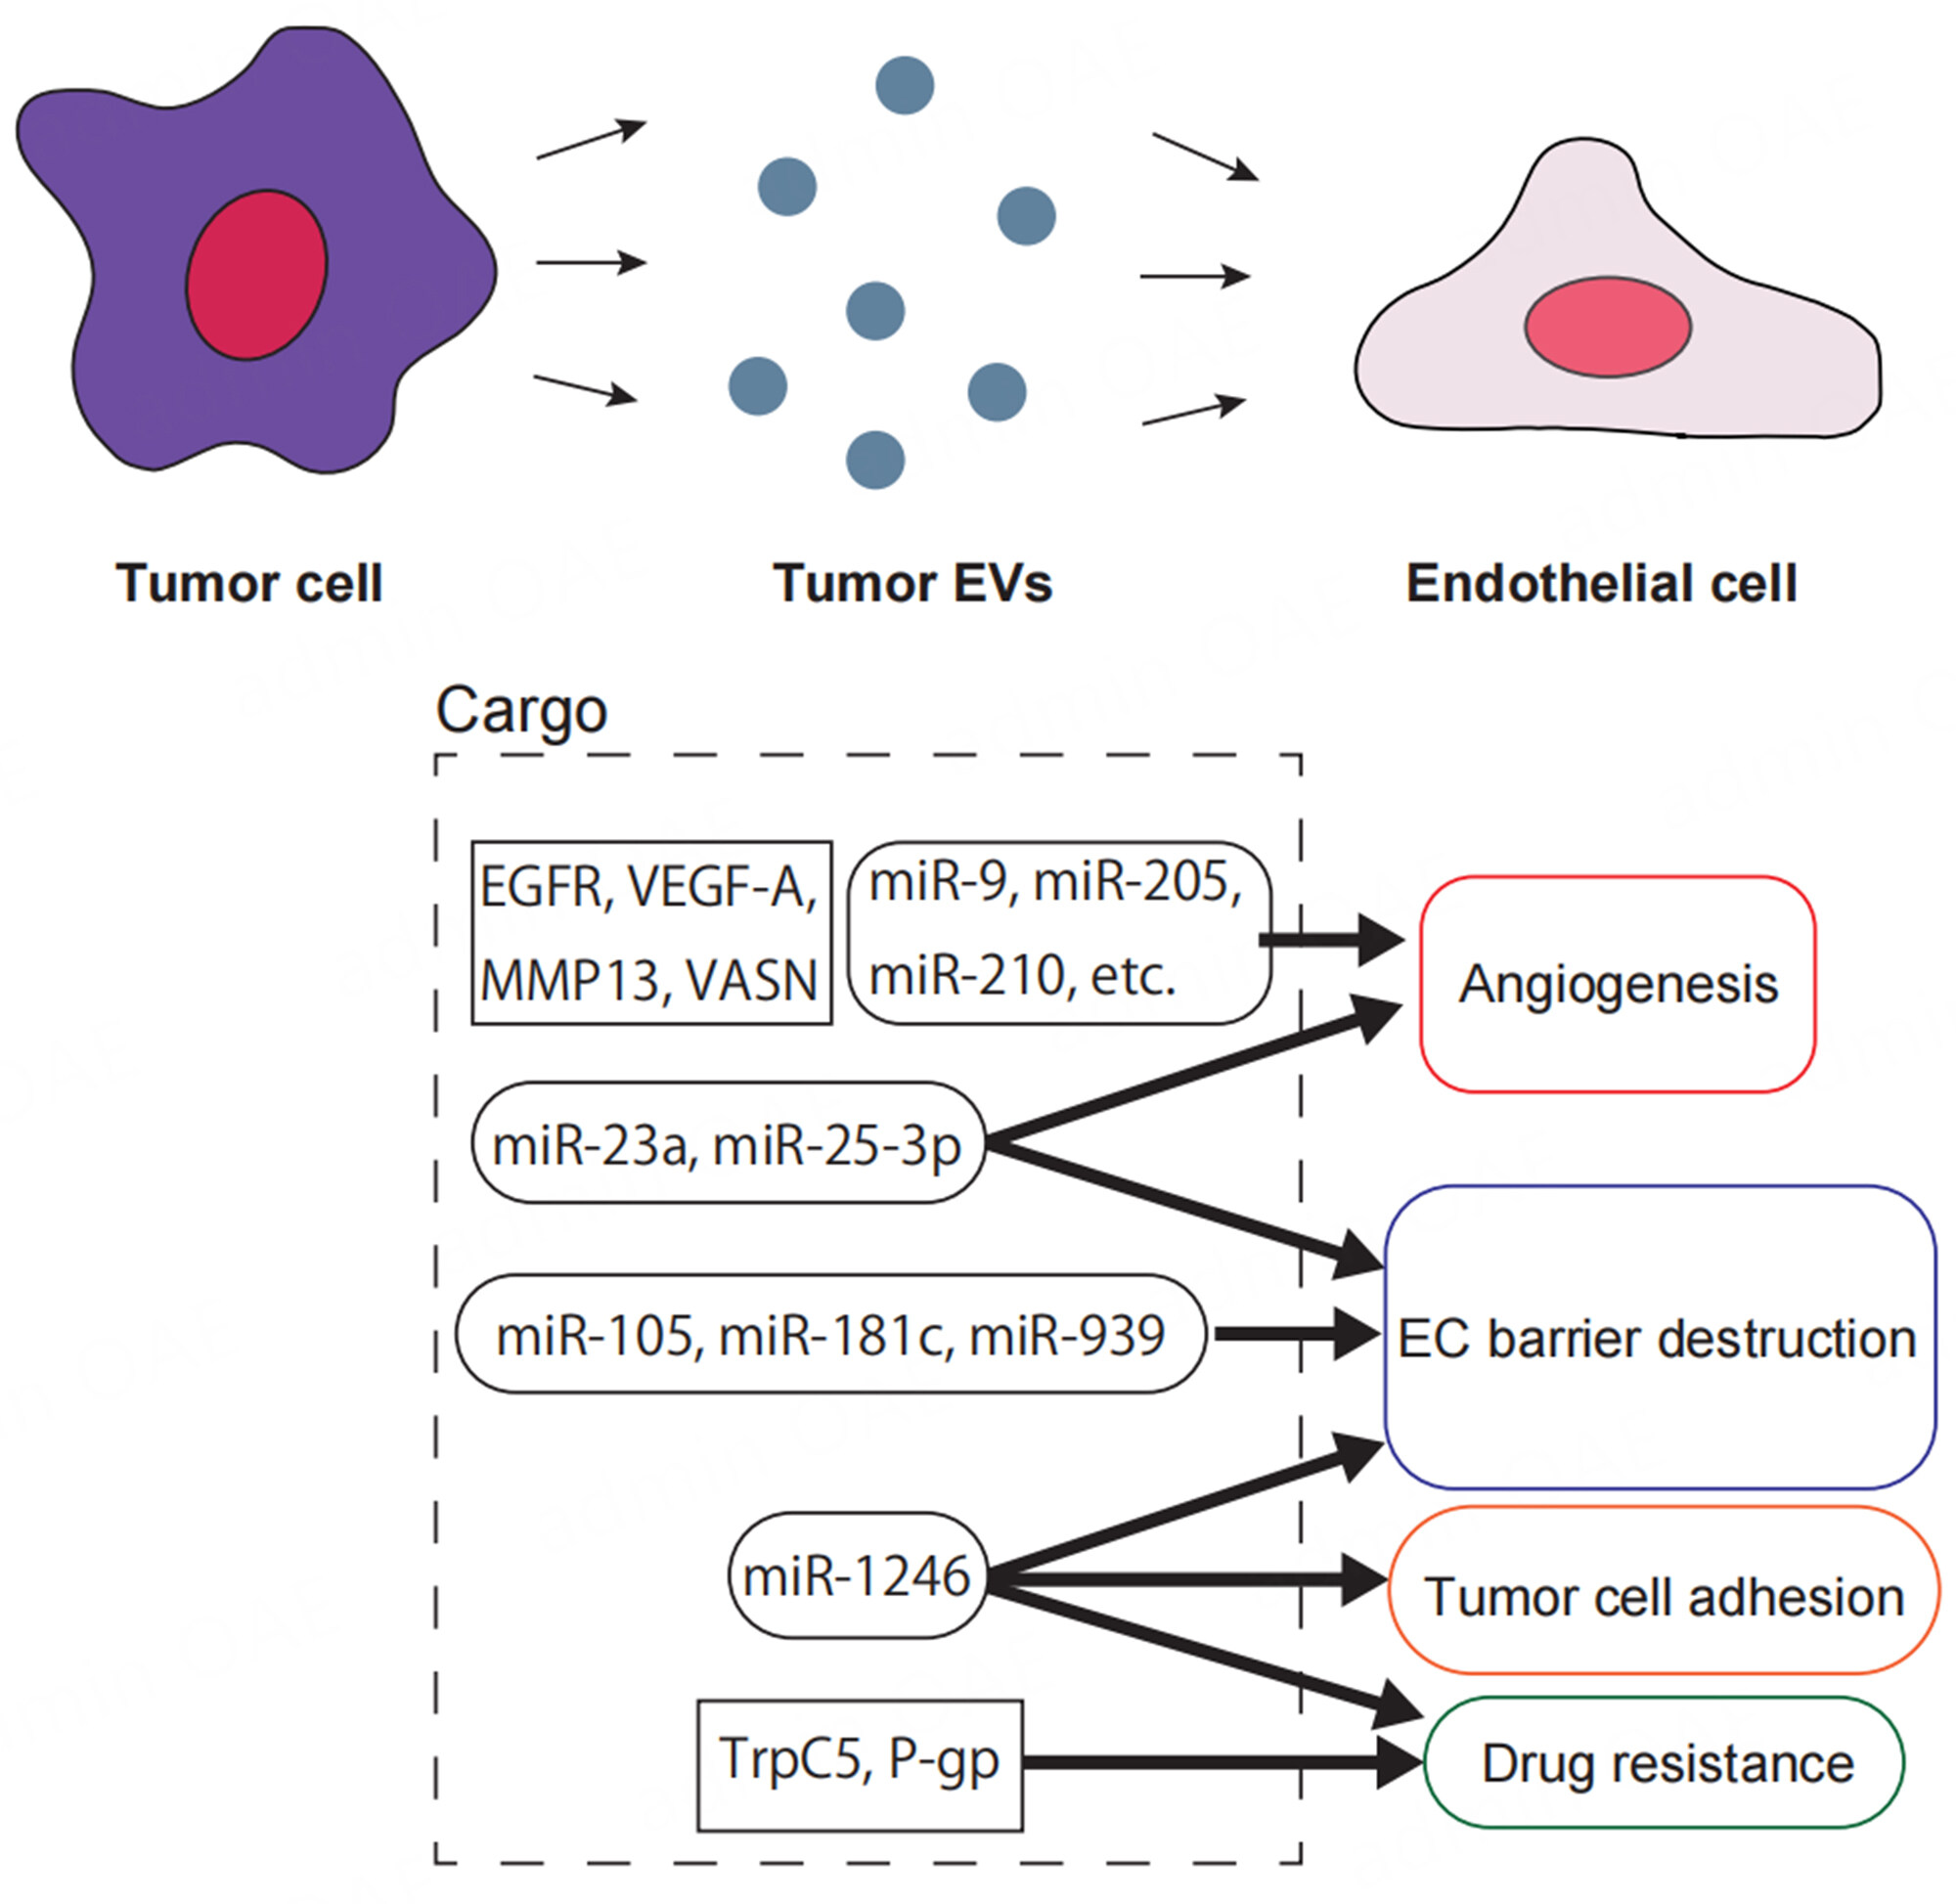 Acquisition of drug resistance in endothelial cells by tumor-derived extracellular vesicles and cancer progression